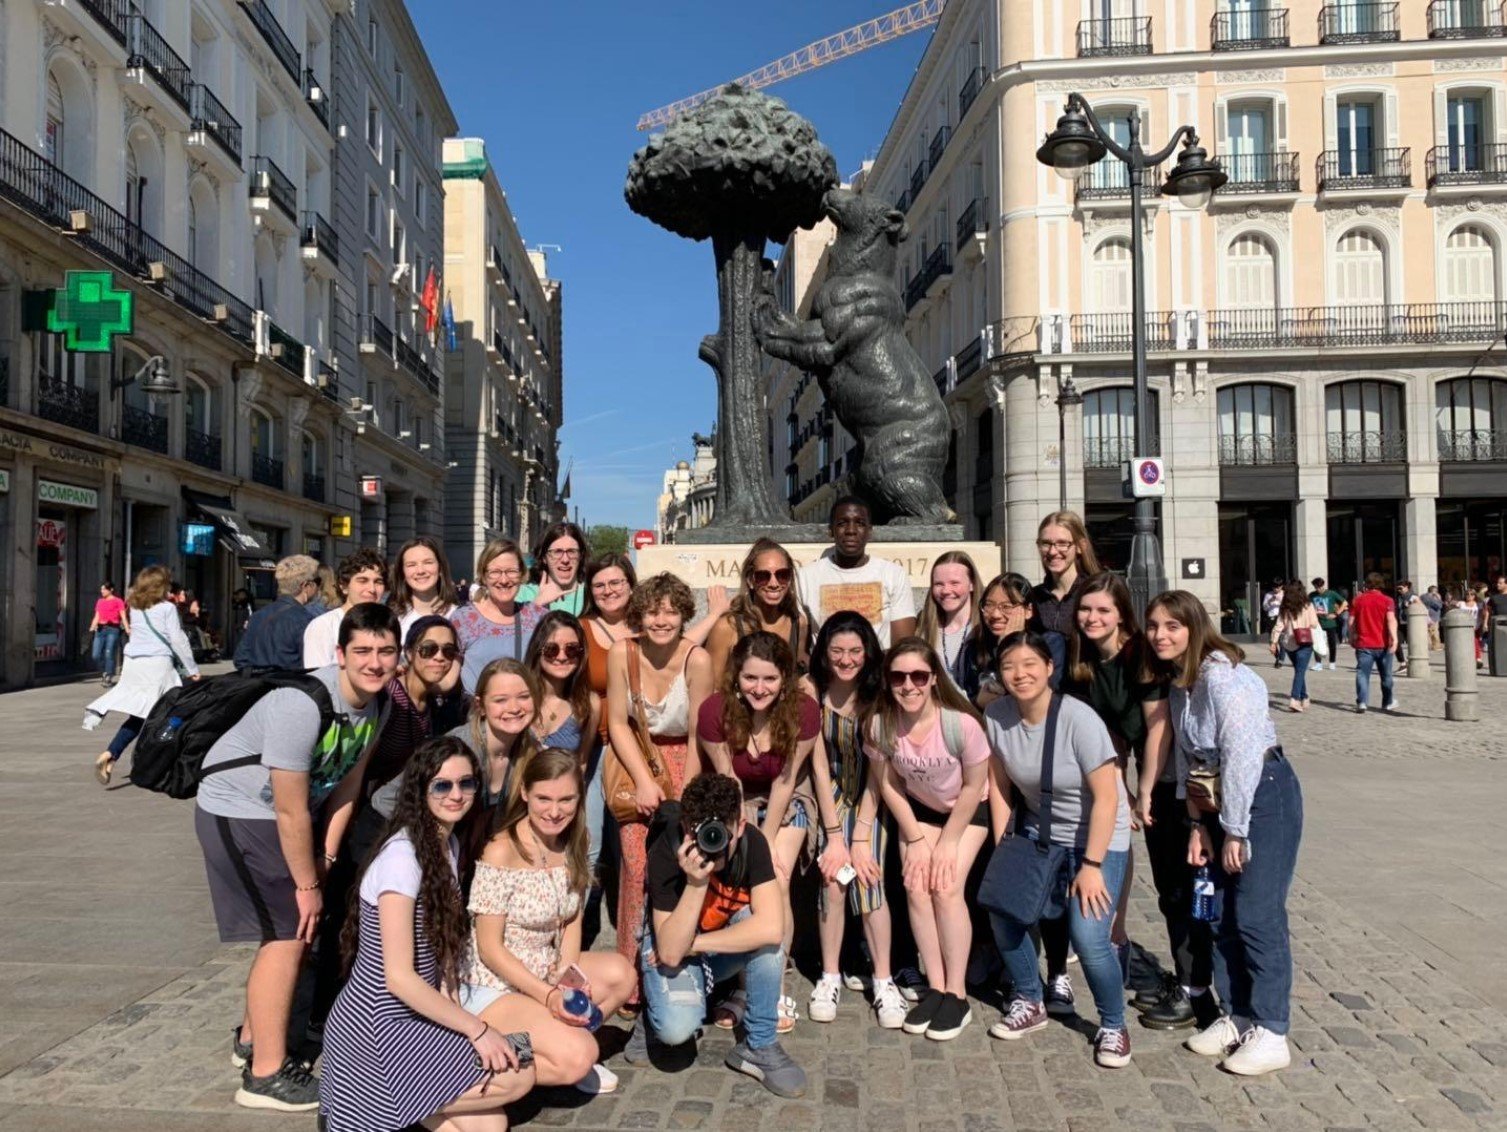 A Student Study Tour Group takes a picture in front of the El Oso y el Madroño statue in Madrid, Spain.